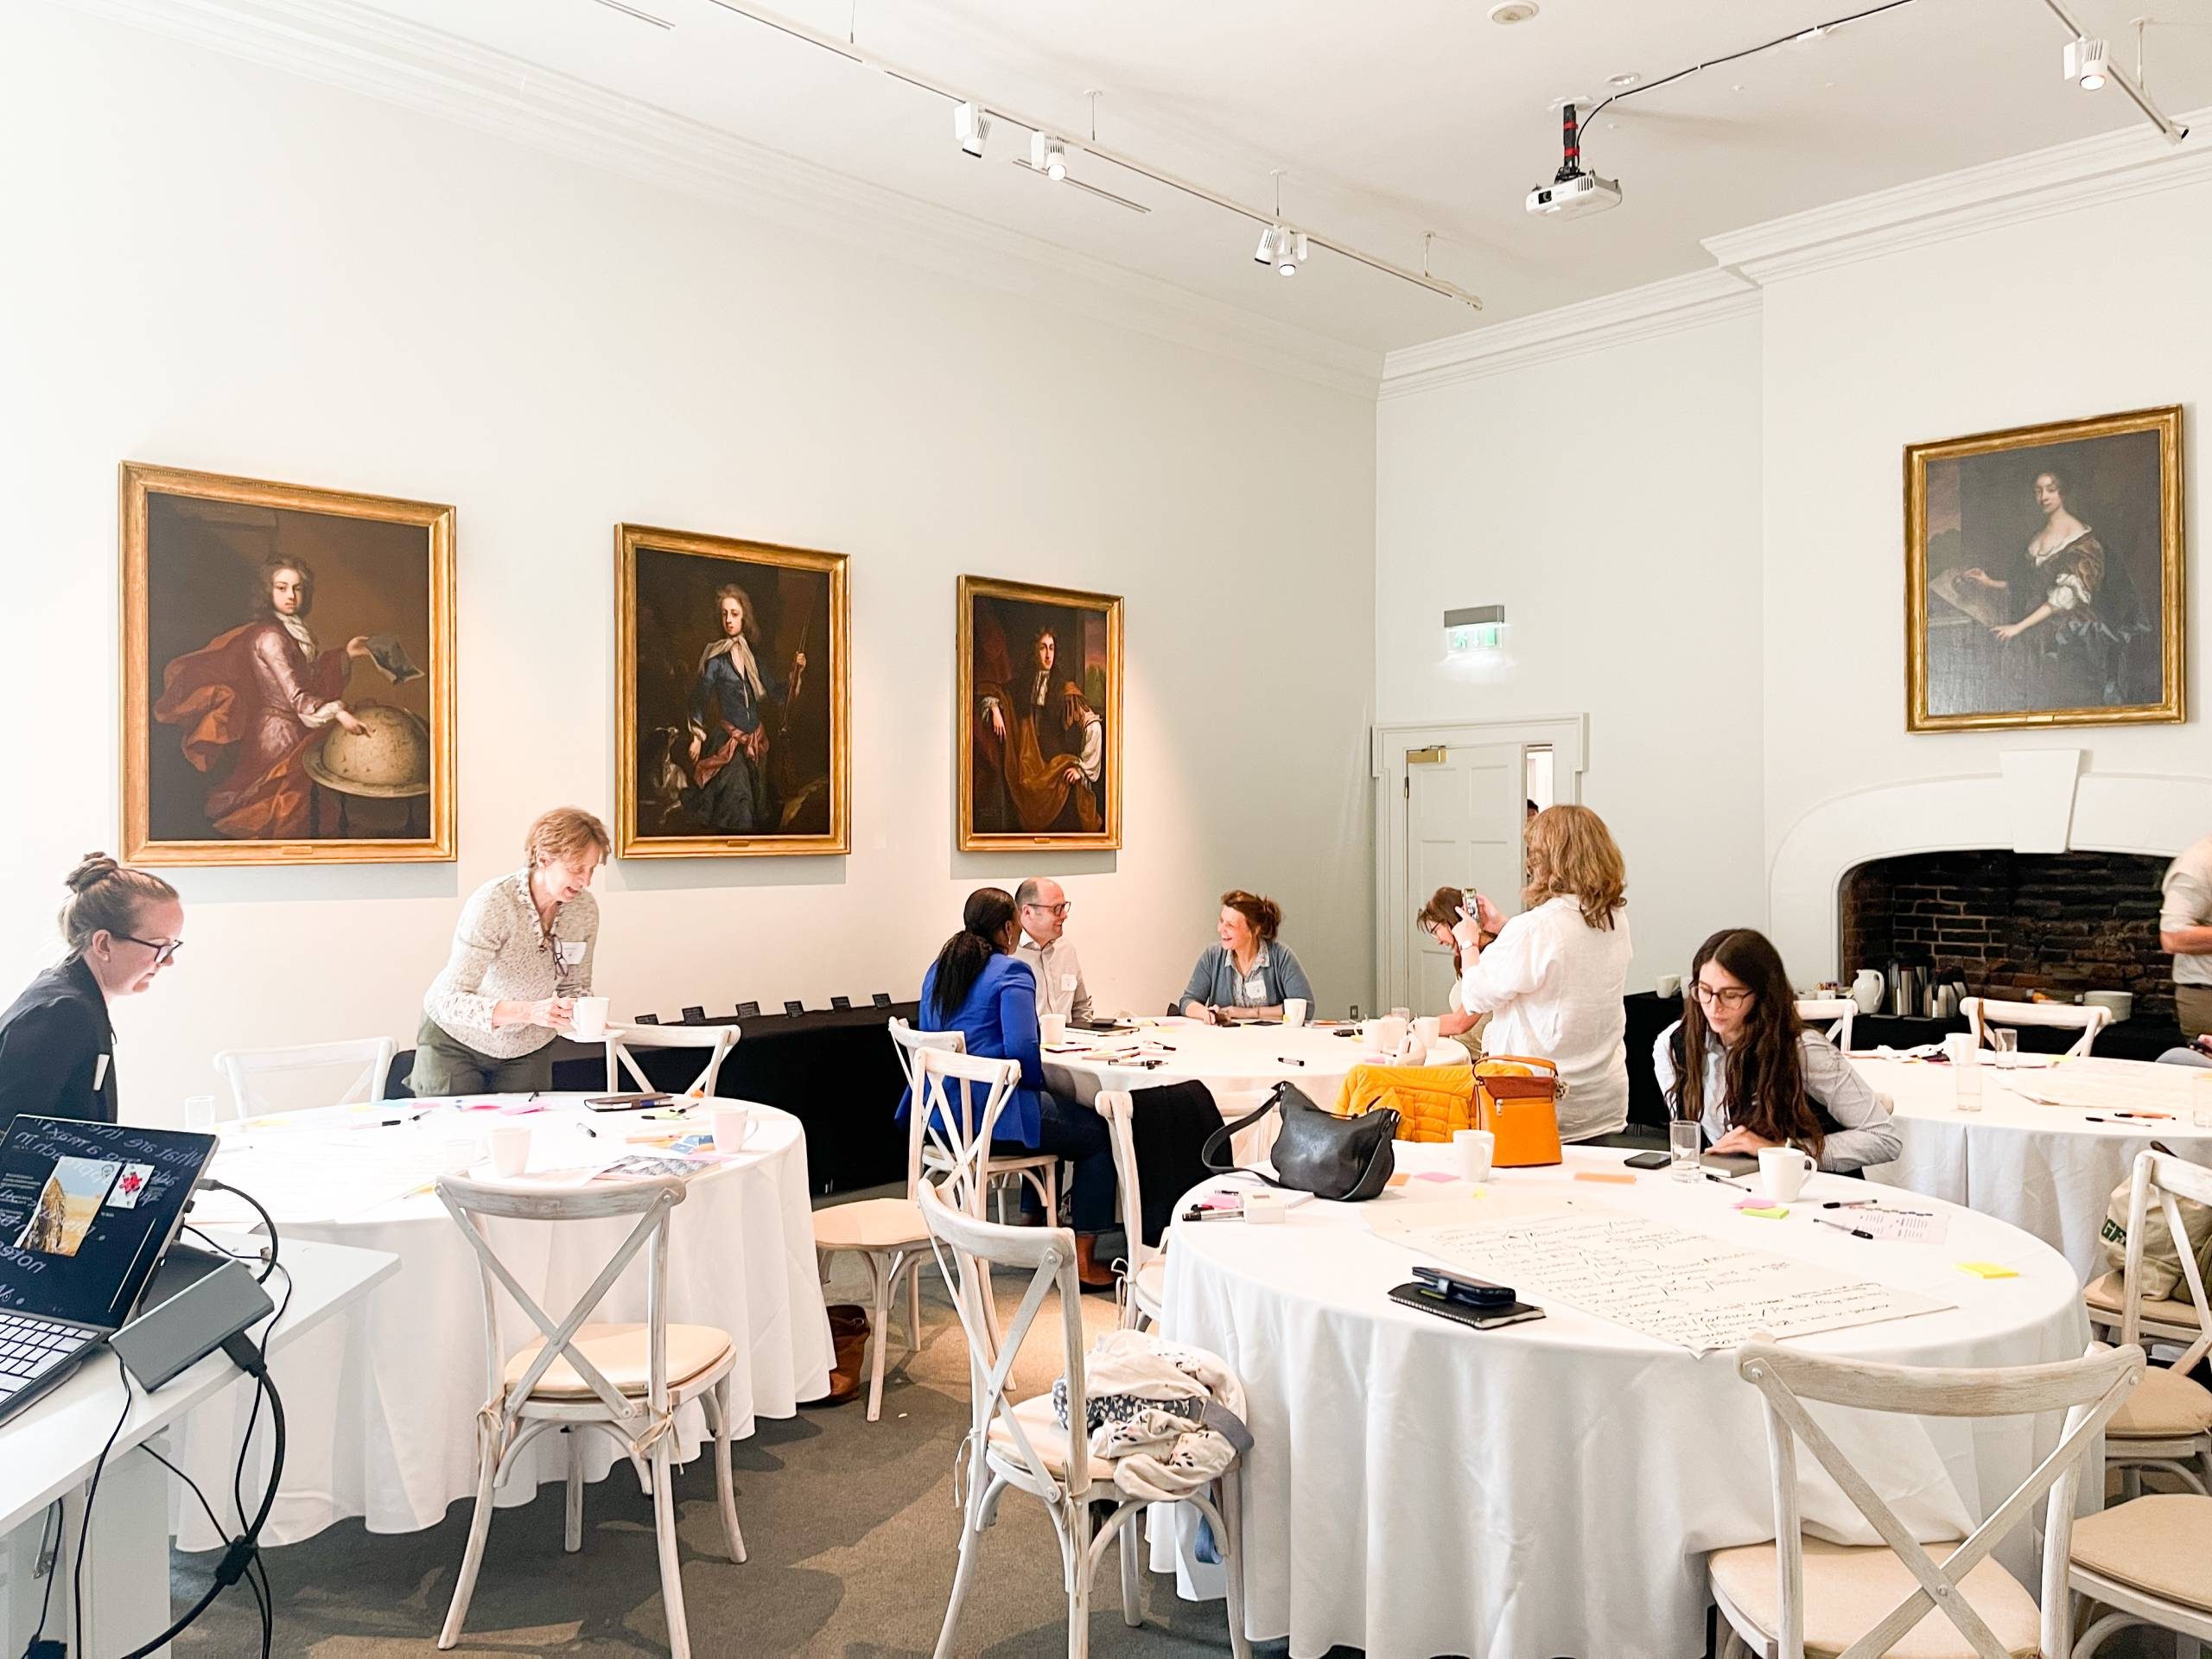 Business people sit around tables talking in a bright white room with a grand fireplace and paintings on the wall.